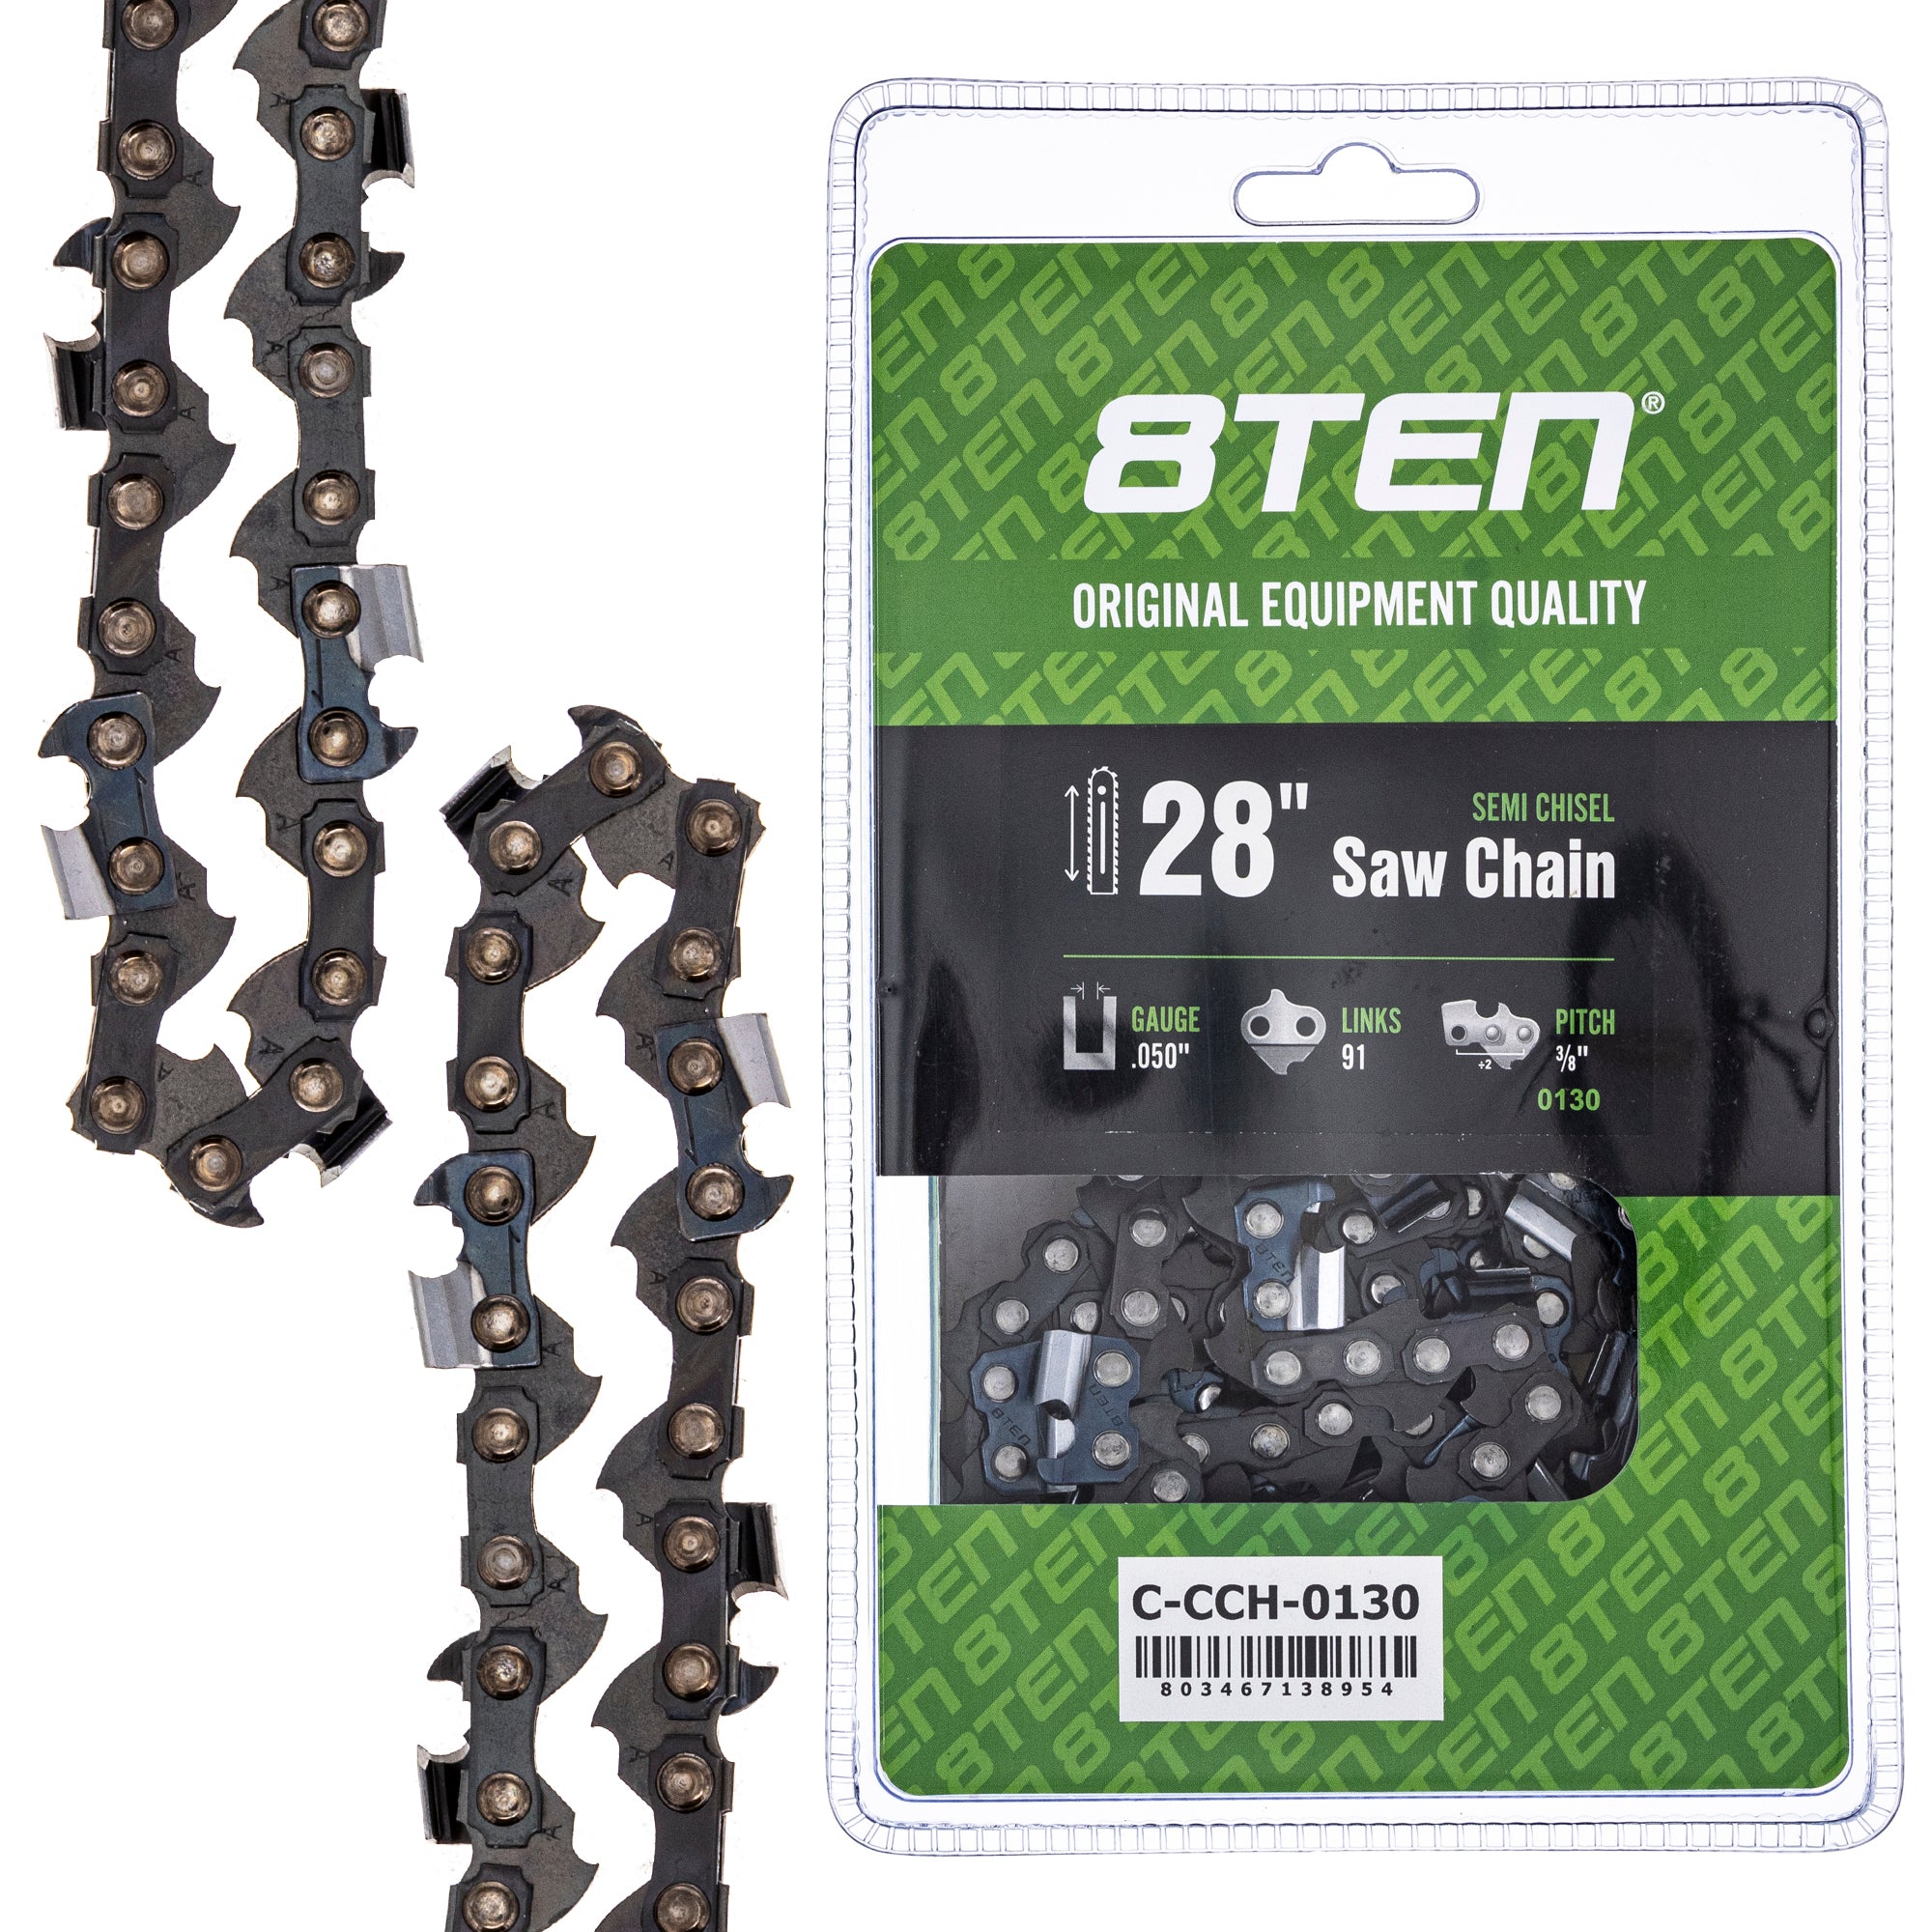 Chainsaw Chain 28 Inch .050 3/8 91DL for zOTHER Oregon MS 066 064 056 8TEN 810-CCC2352H